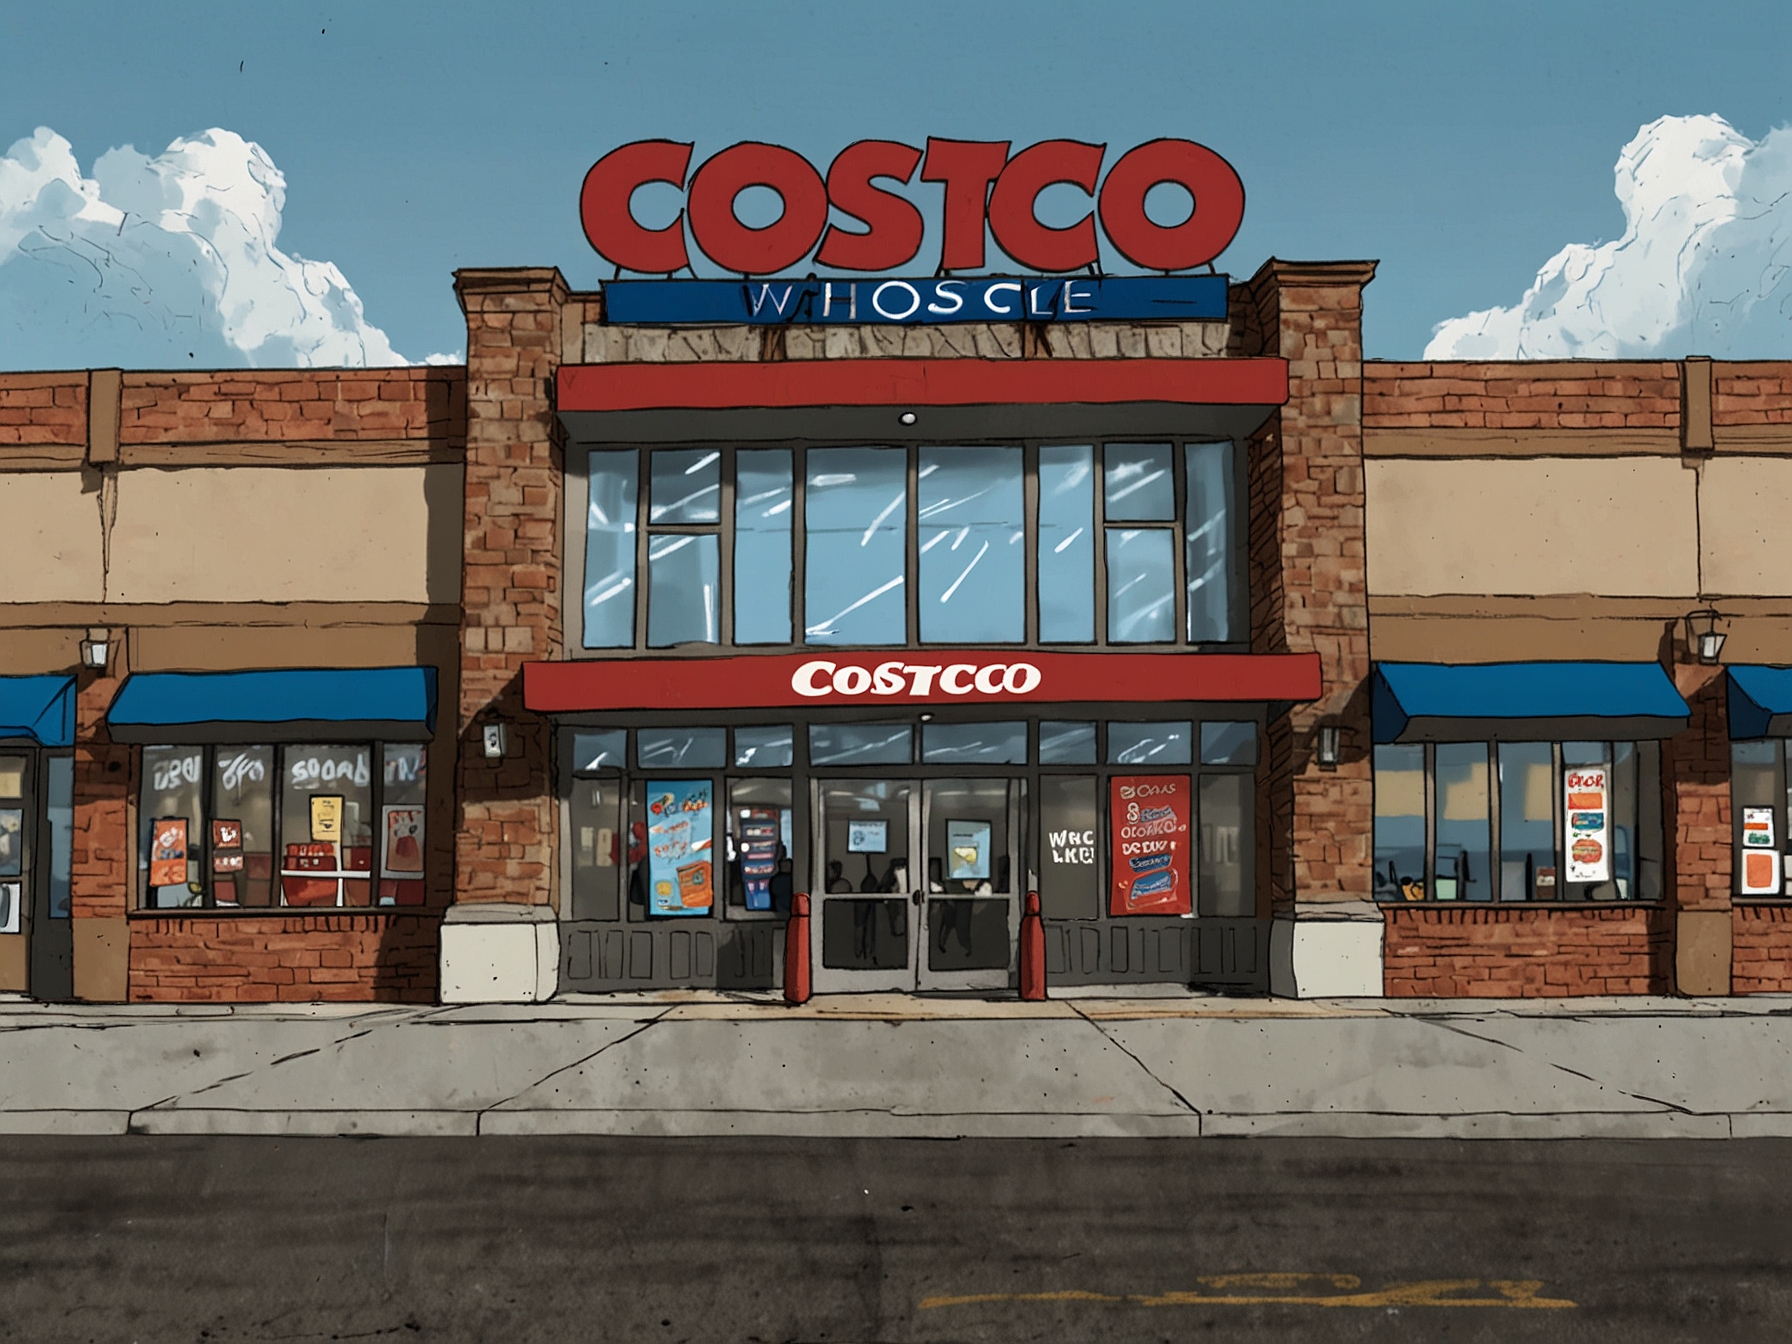 A vibrant retail store exterior marked with a Costco Wholesale sign, illustrating the company's strong market presence and successful adaptation to evolving consumer behaviors and the e-commerce landscape.